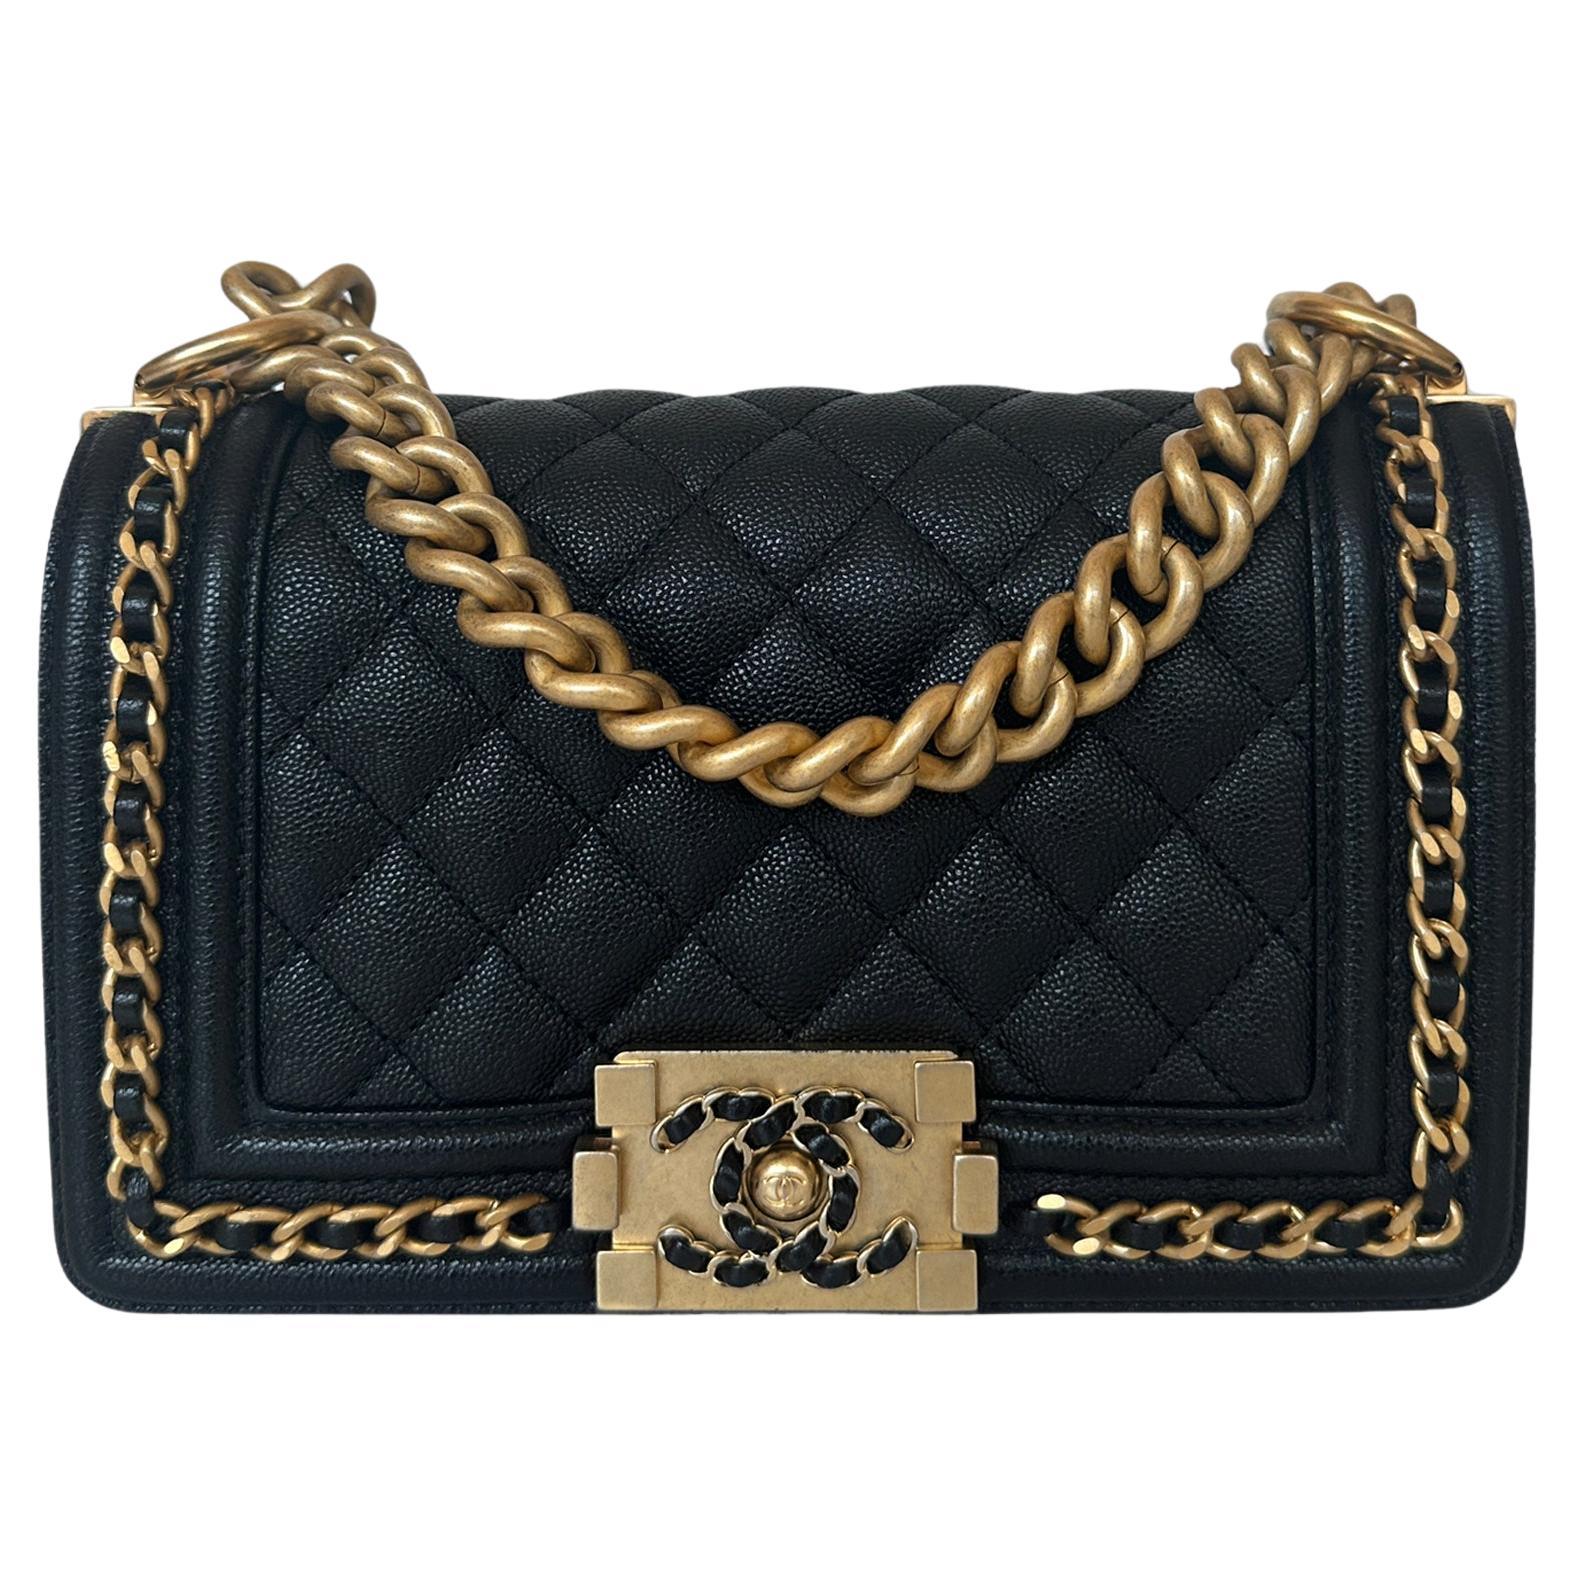 Chanel Black Caviar Leather Small Quilted Chain Around Boy Bag